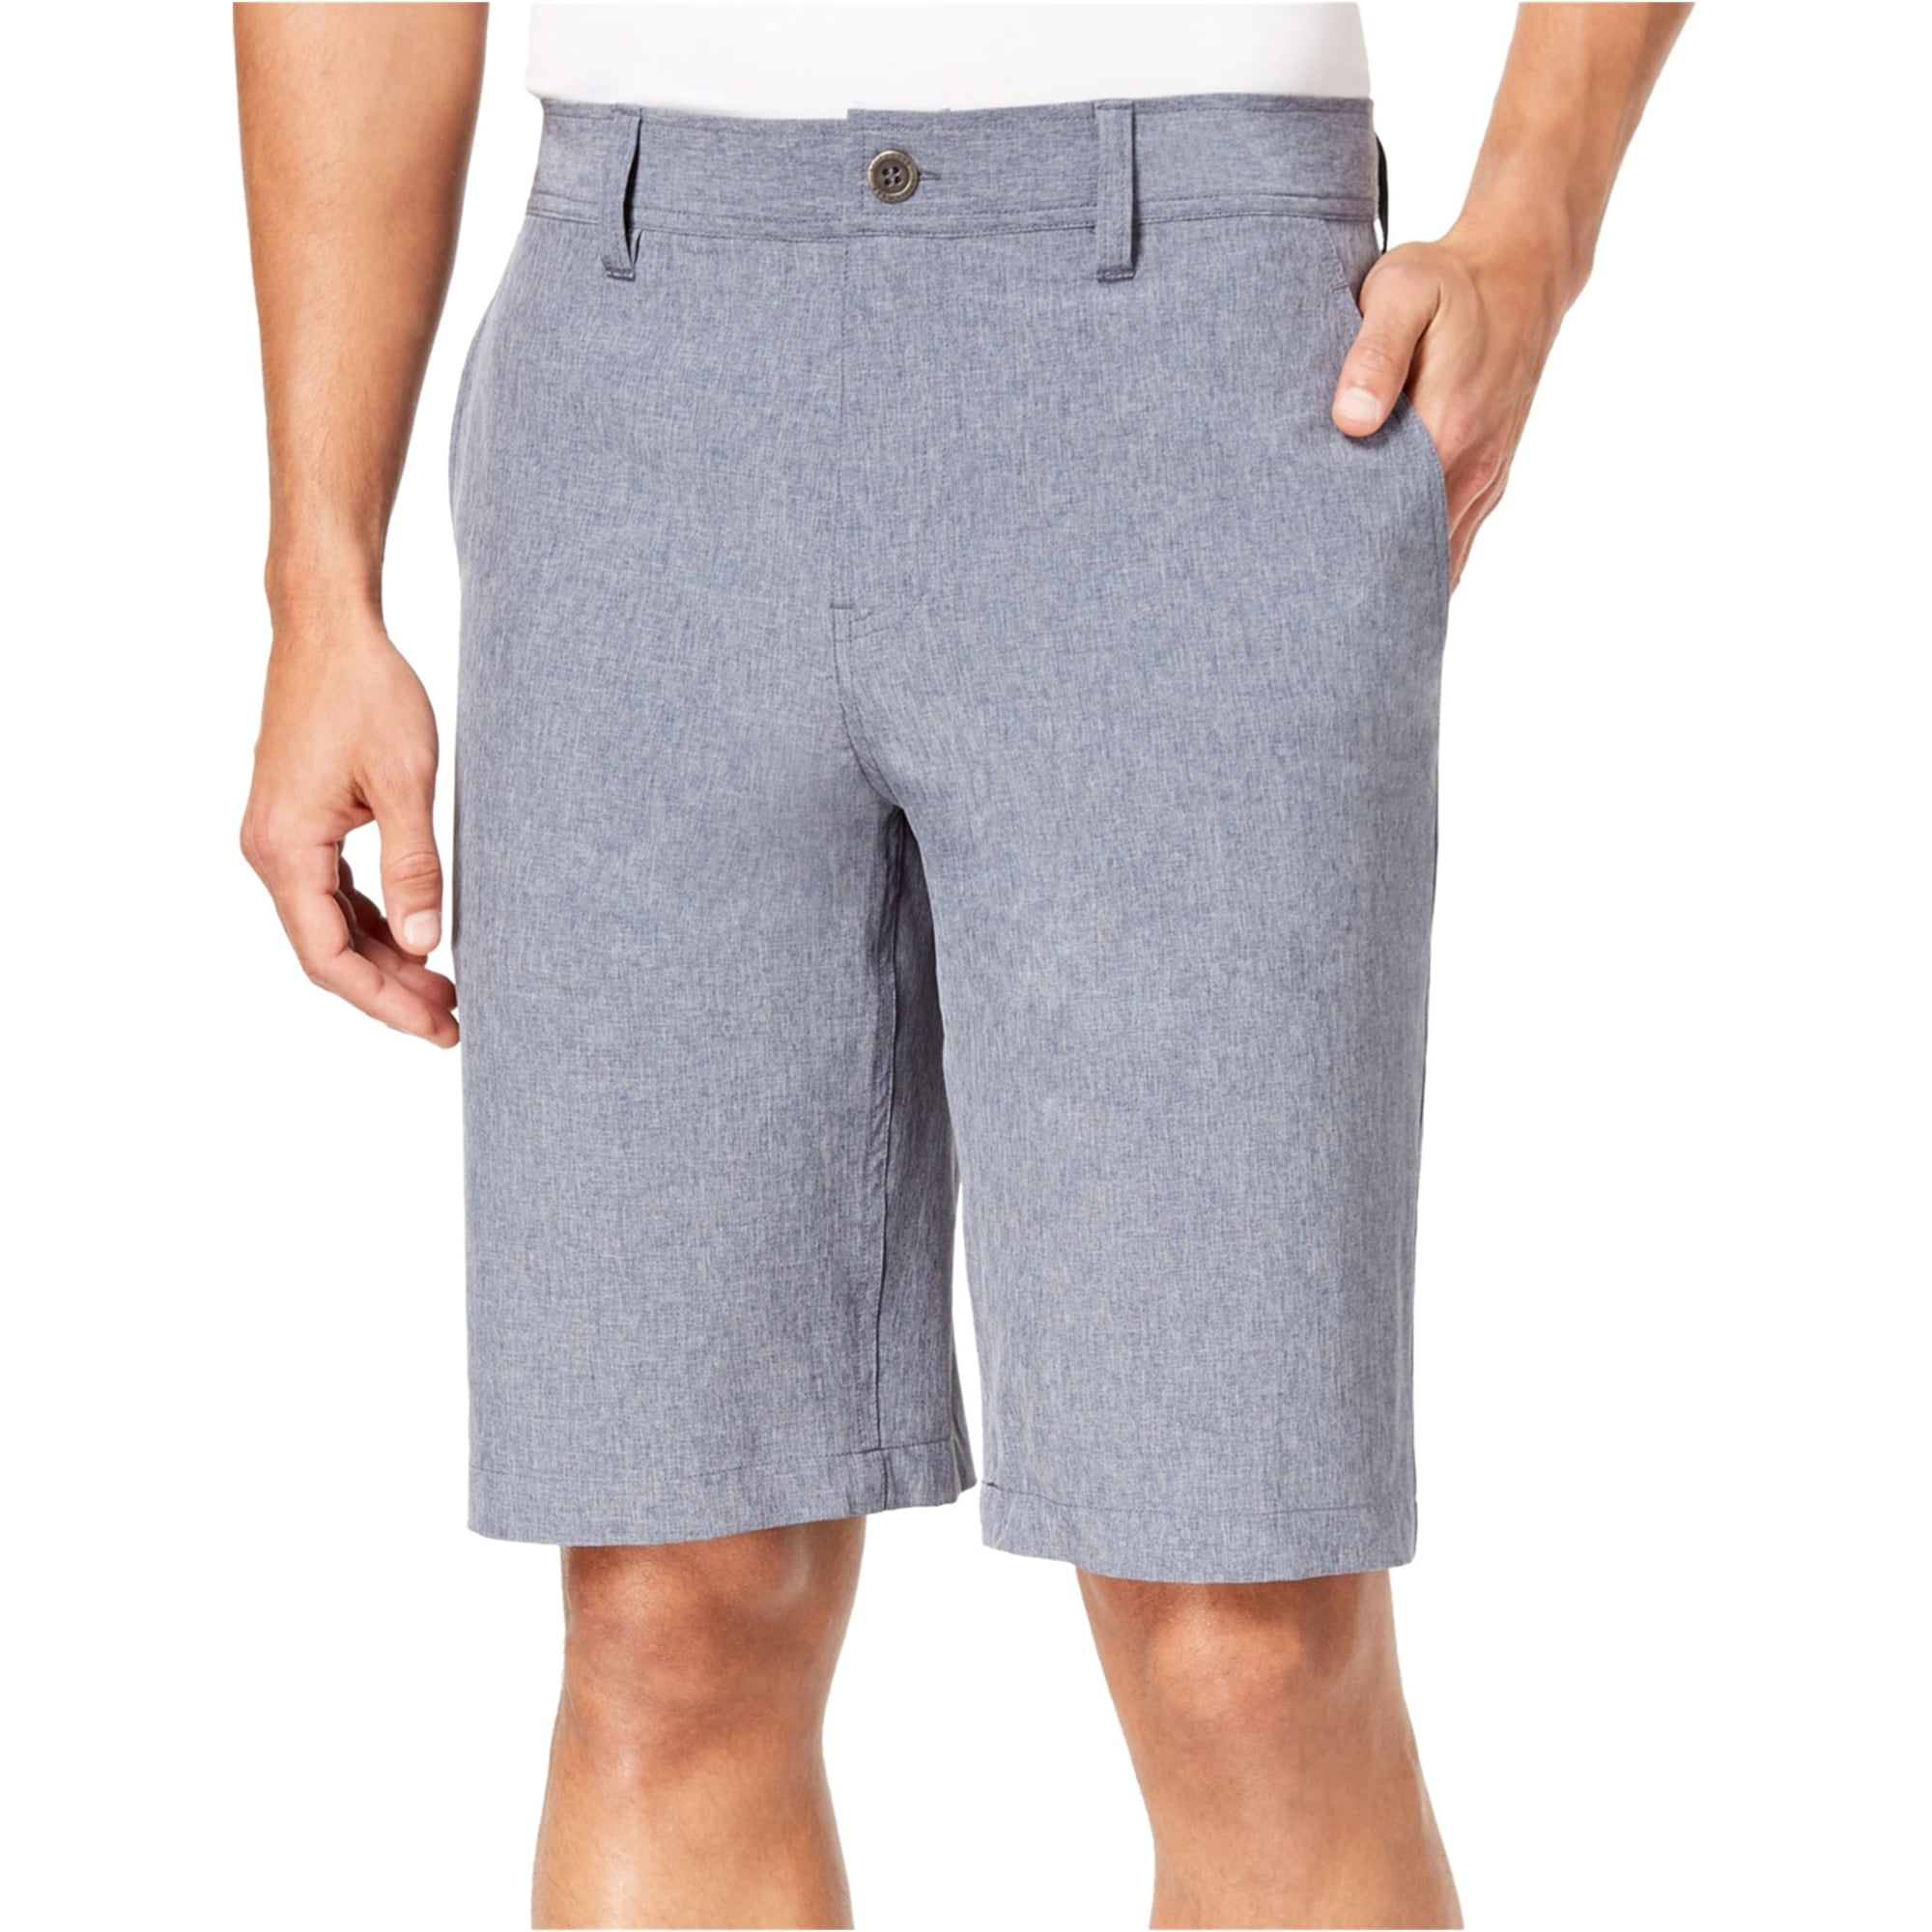 Mens Stretch Chino Shorts Casual Flat Front Slim Fit Spandex Half Pant 